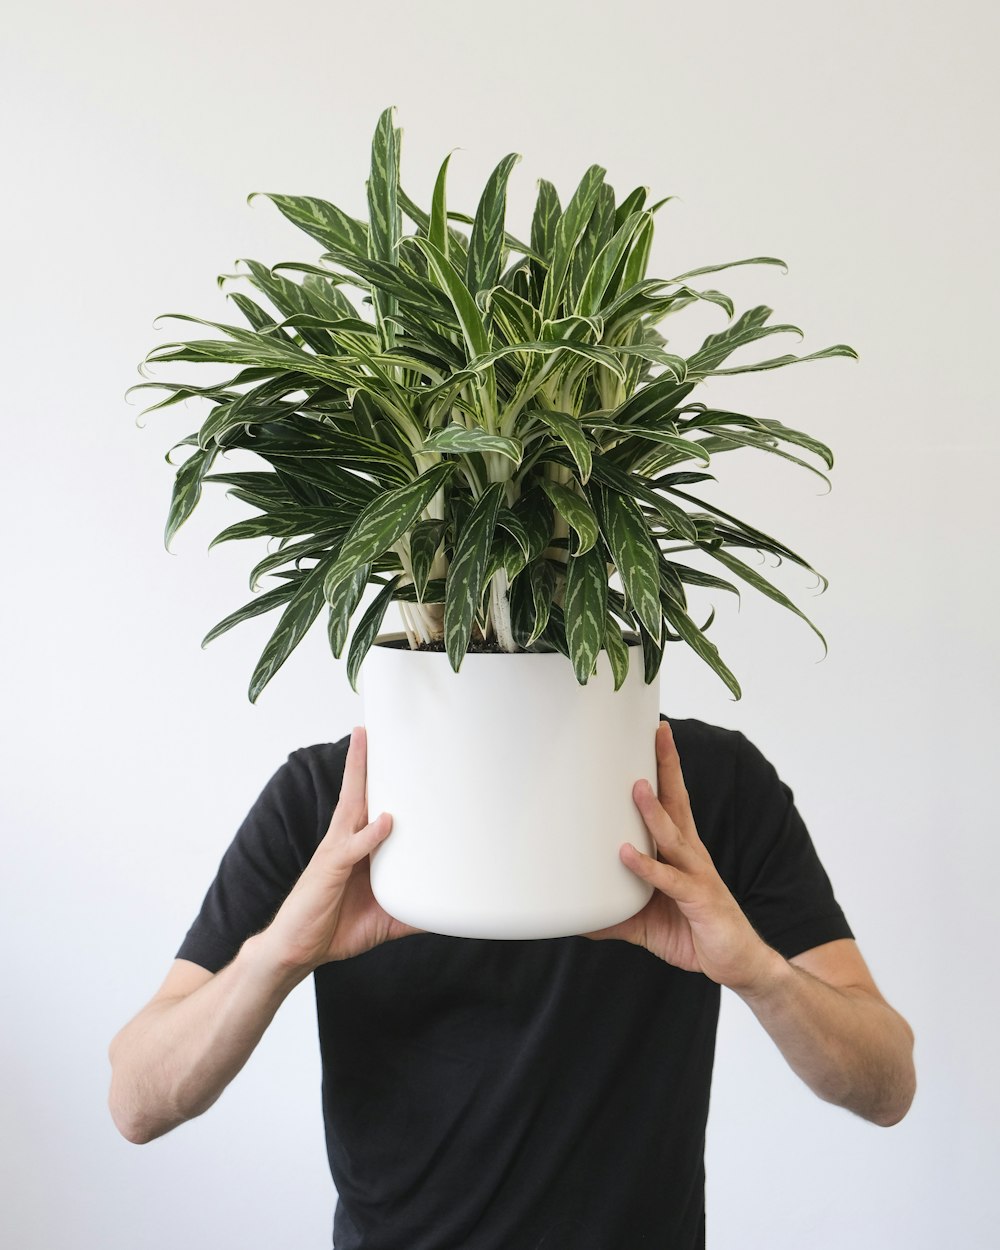 a person holding their hands up in front of a potted plant